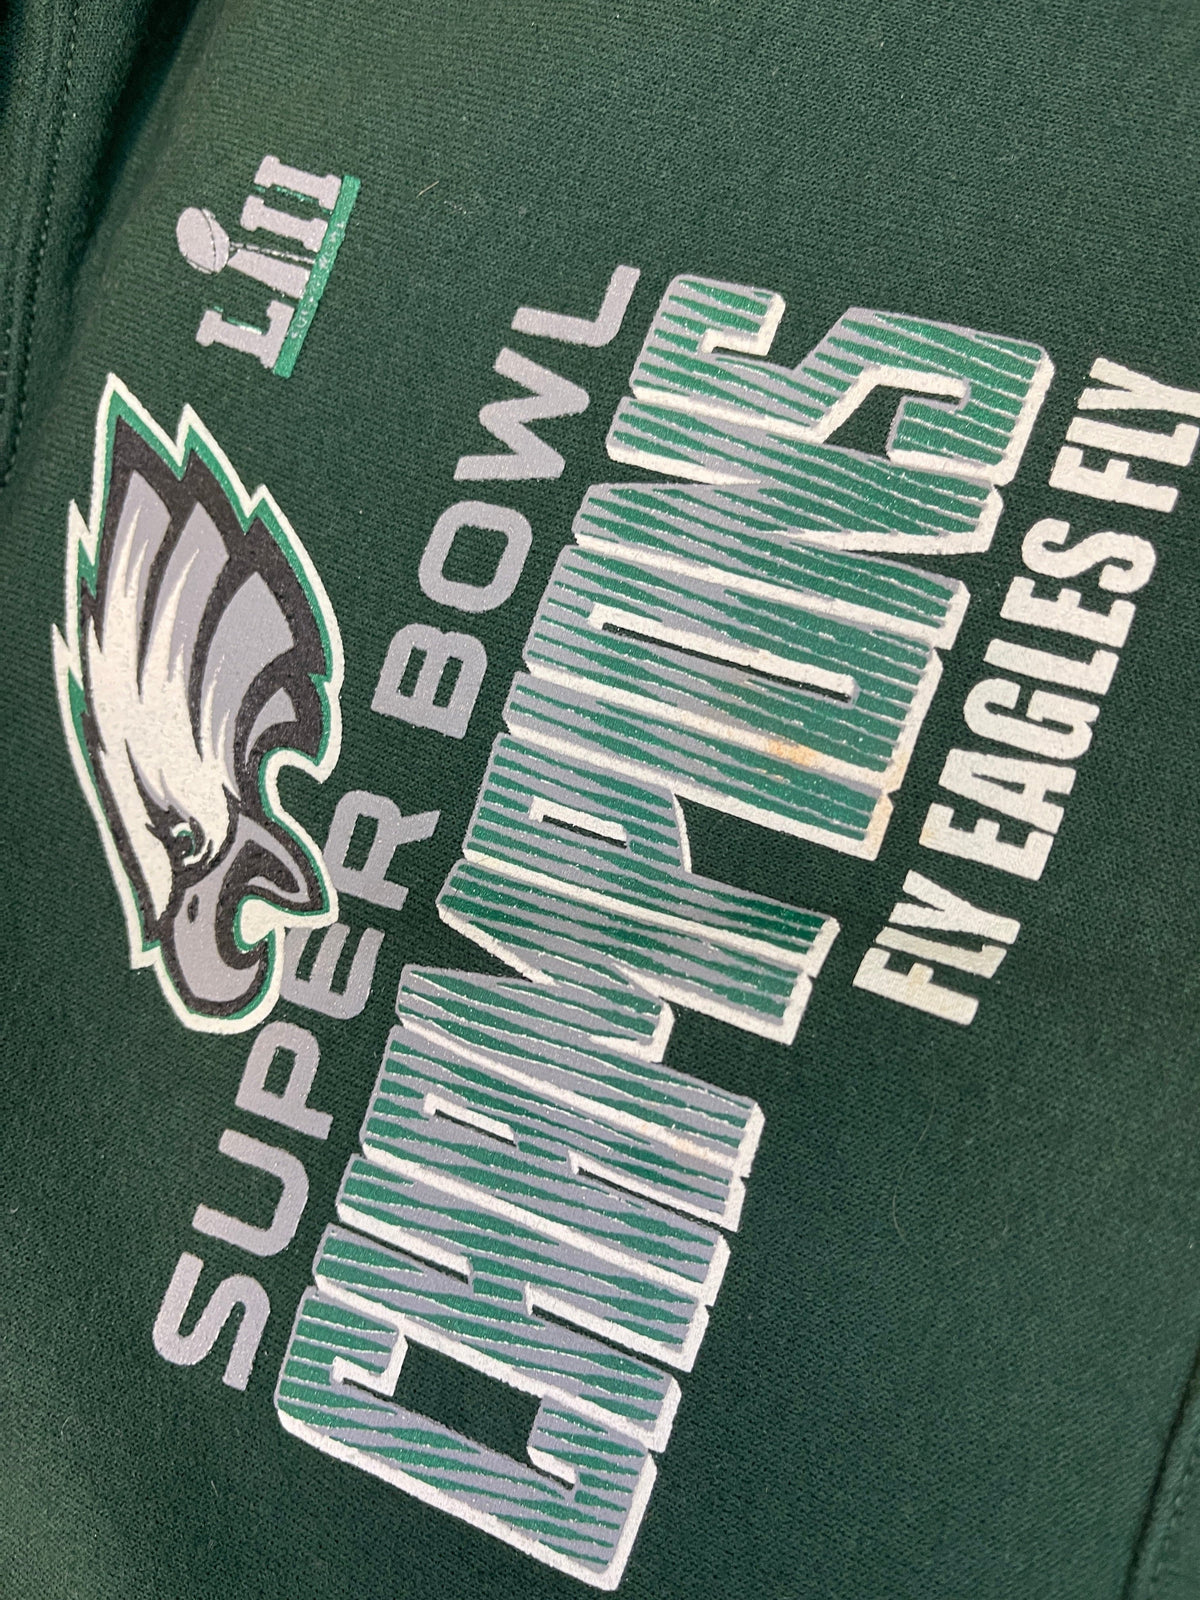 NFL Philadephia Eagles Super Bowl LII Champions Pullover Hoodie Youth Small 6-8